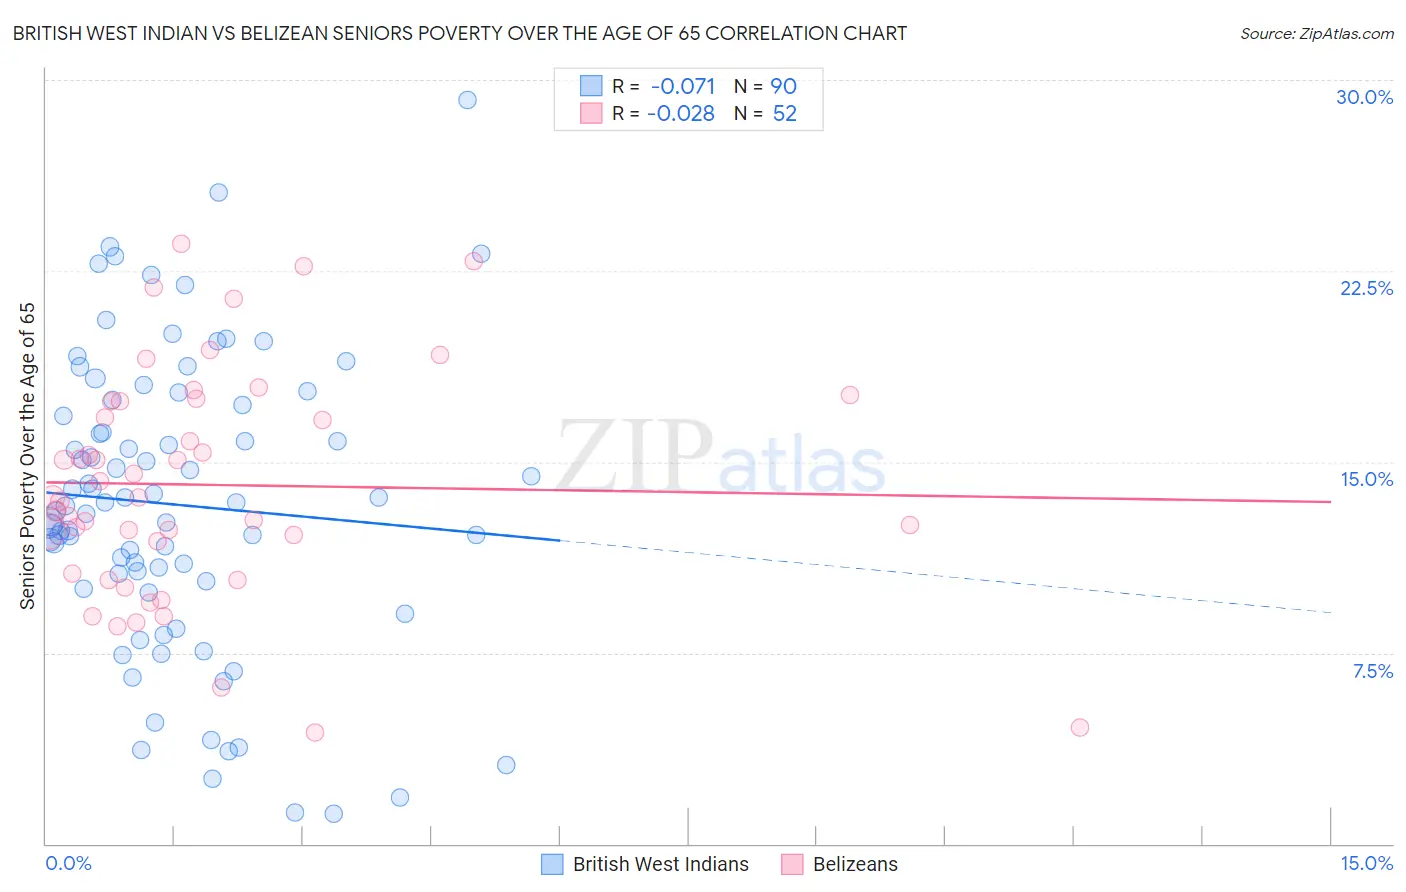 British West Indian vs Belizean Seniors Poverty Over the Age of 65